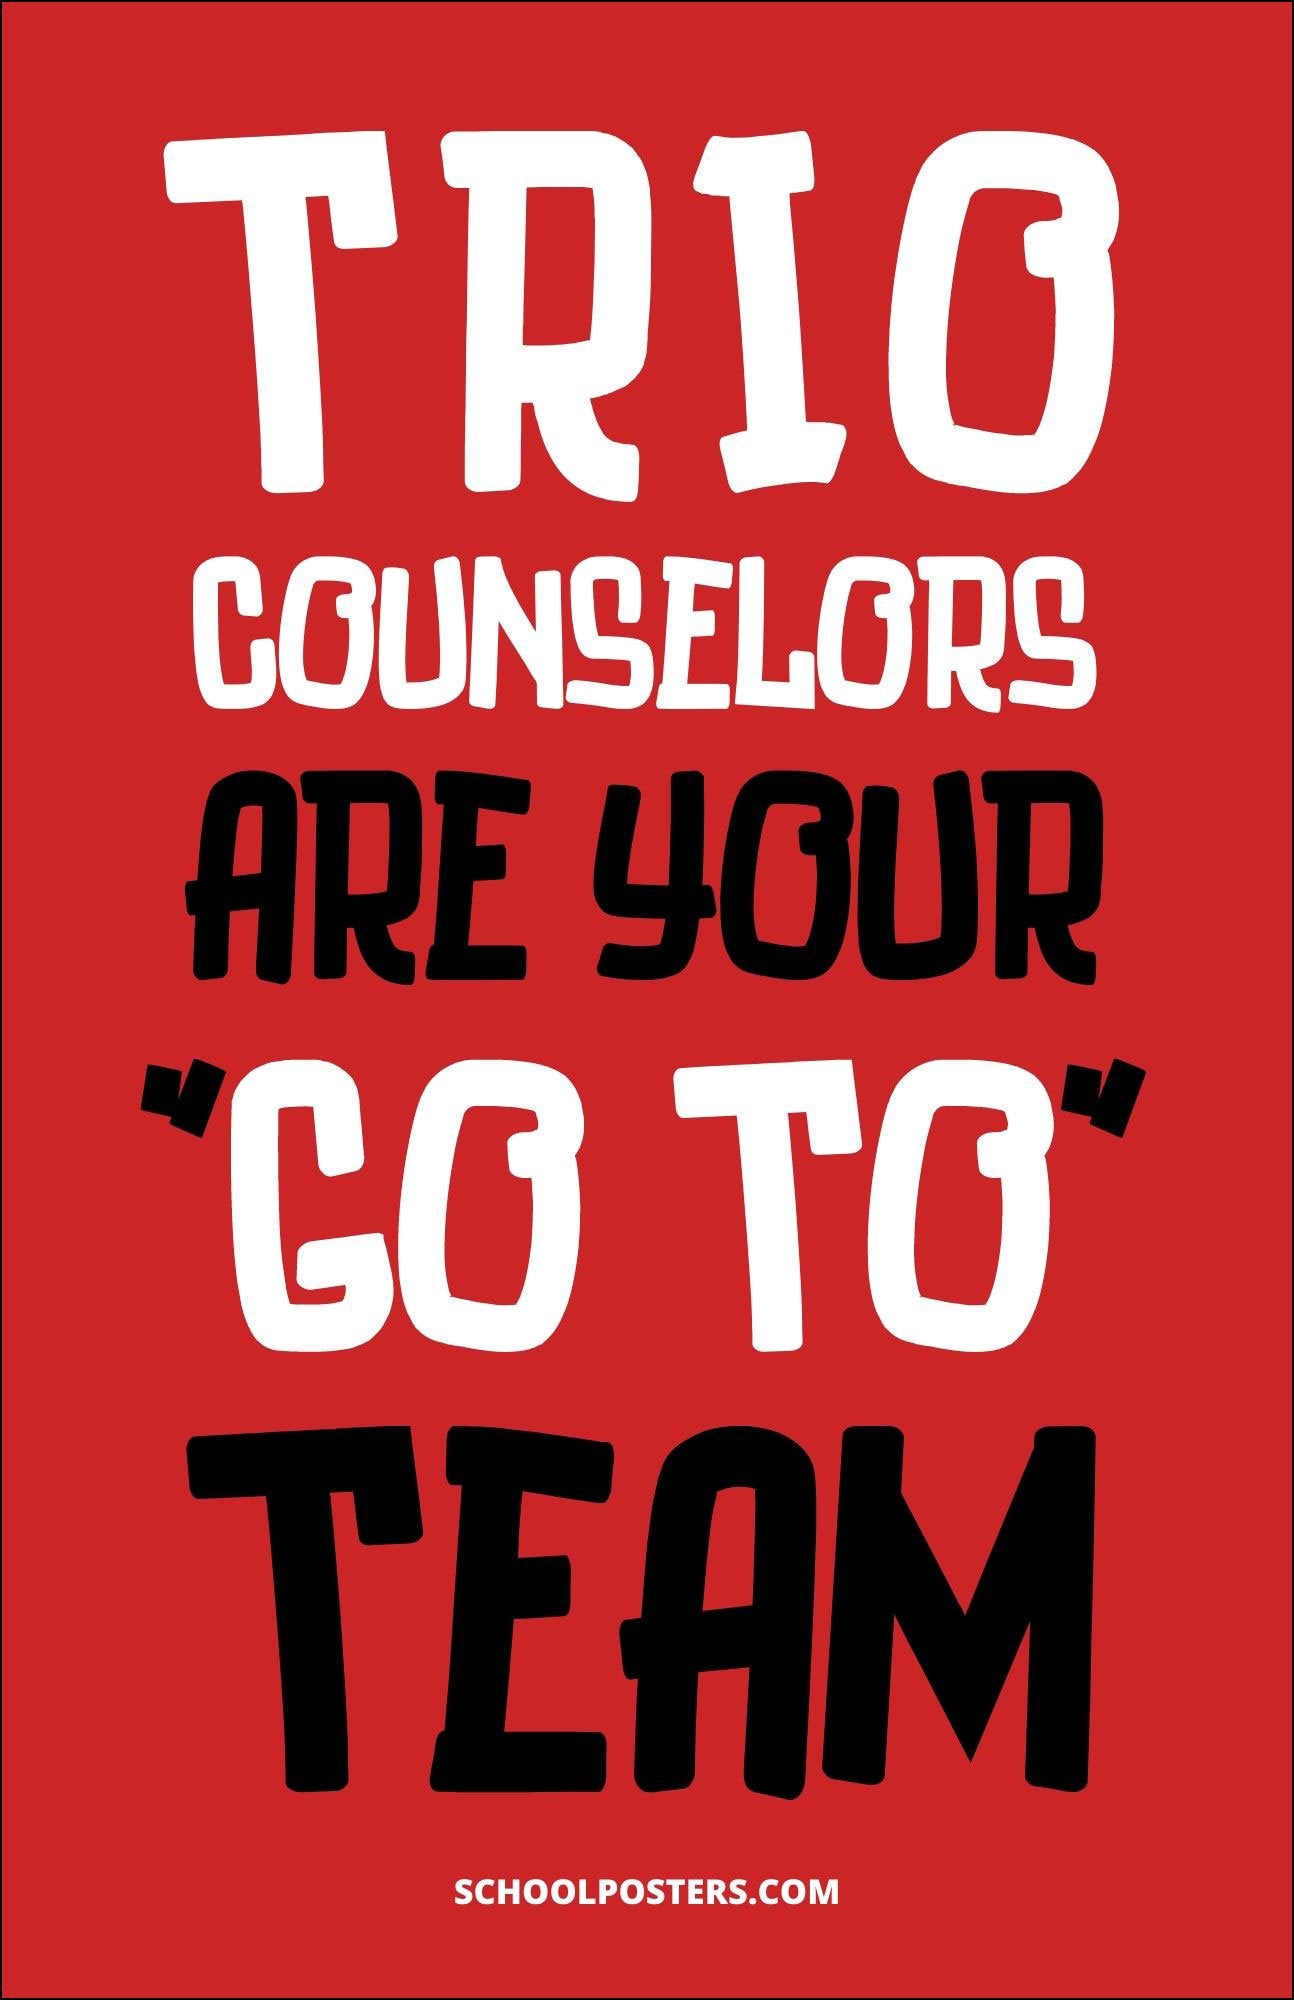 TRIO Counselors Poster